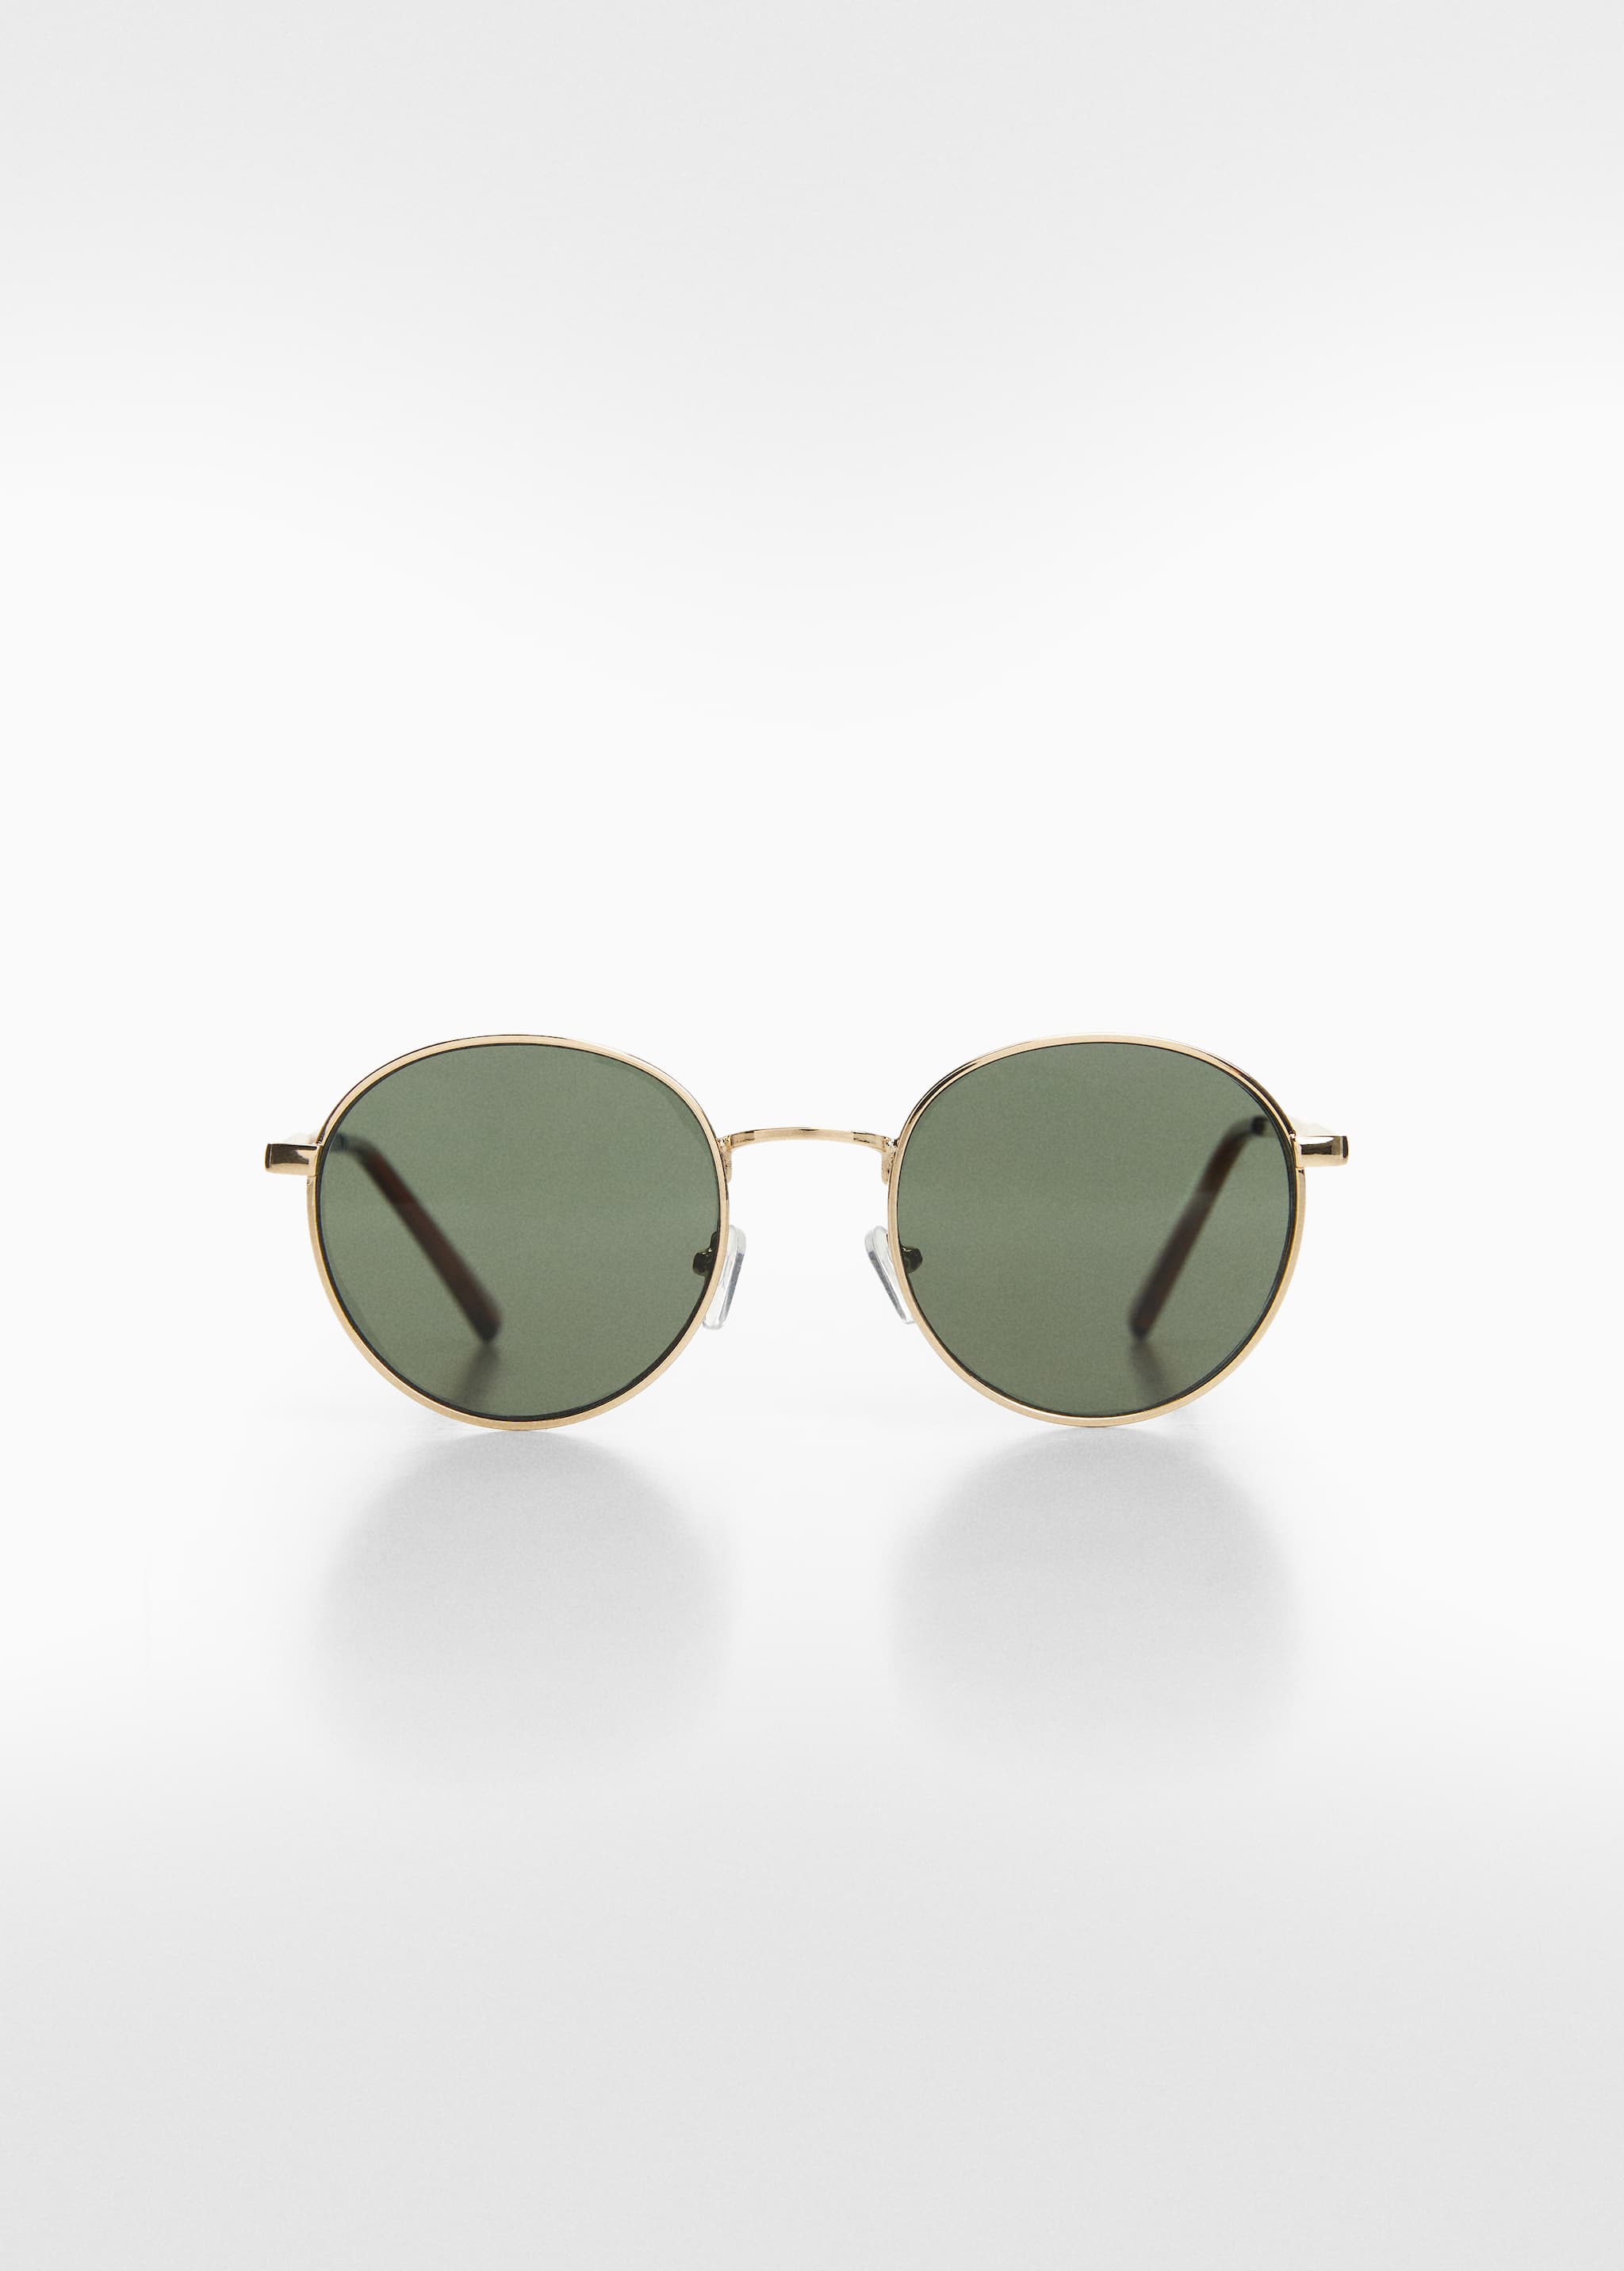 Round Metal Sunglasses - Article without model